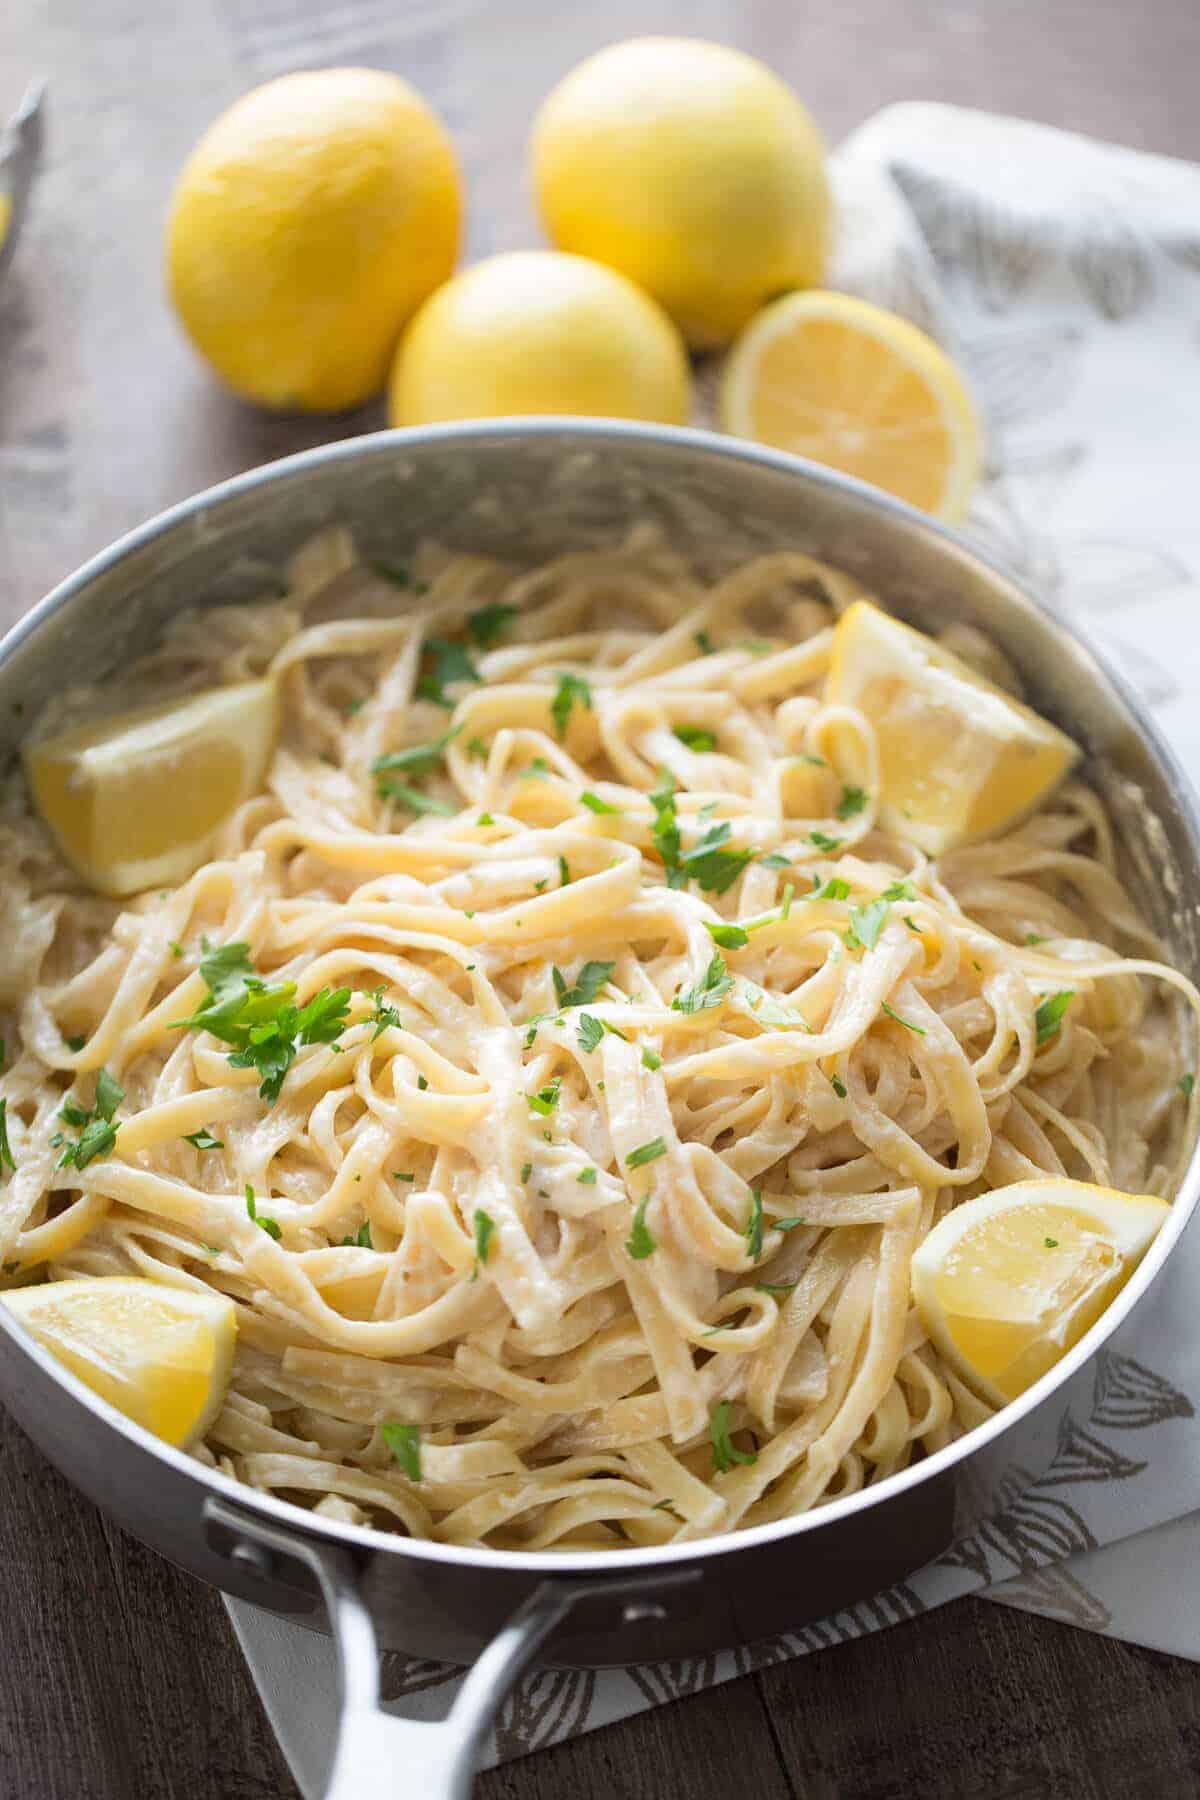 This easy fettuccine Alfredo is so simple but so good! The sauce is fresh, bright and so smooth!